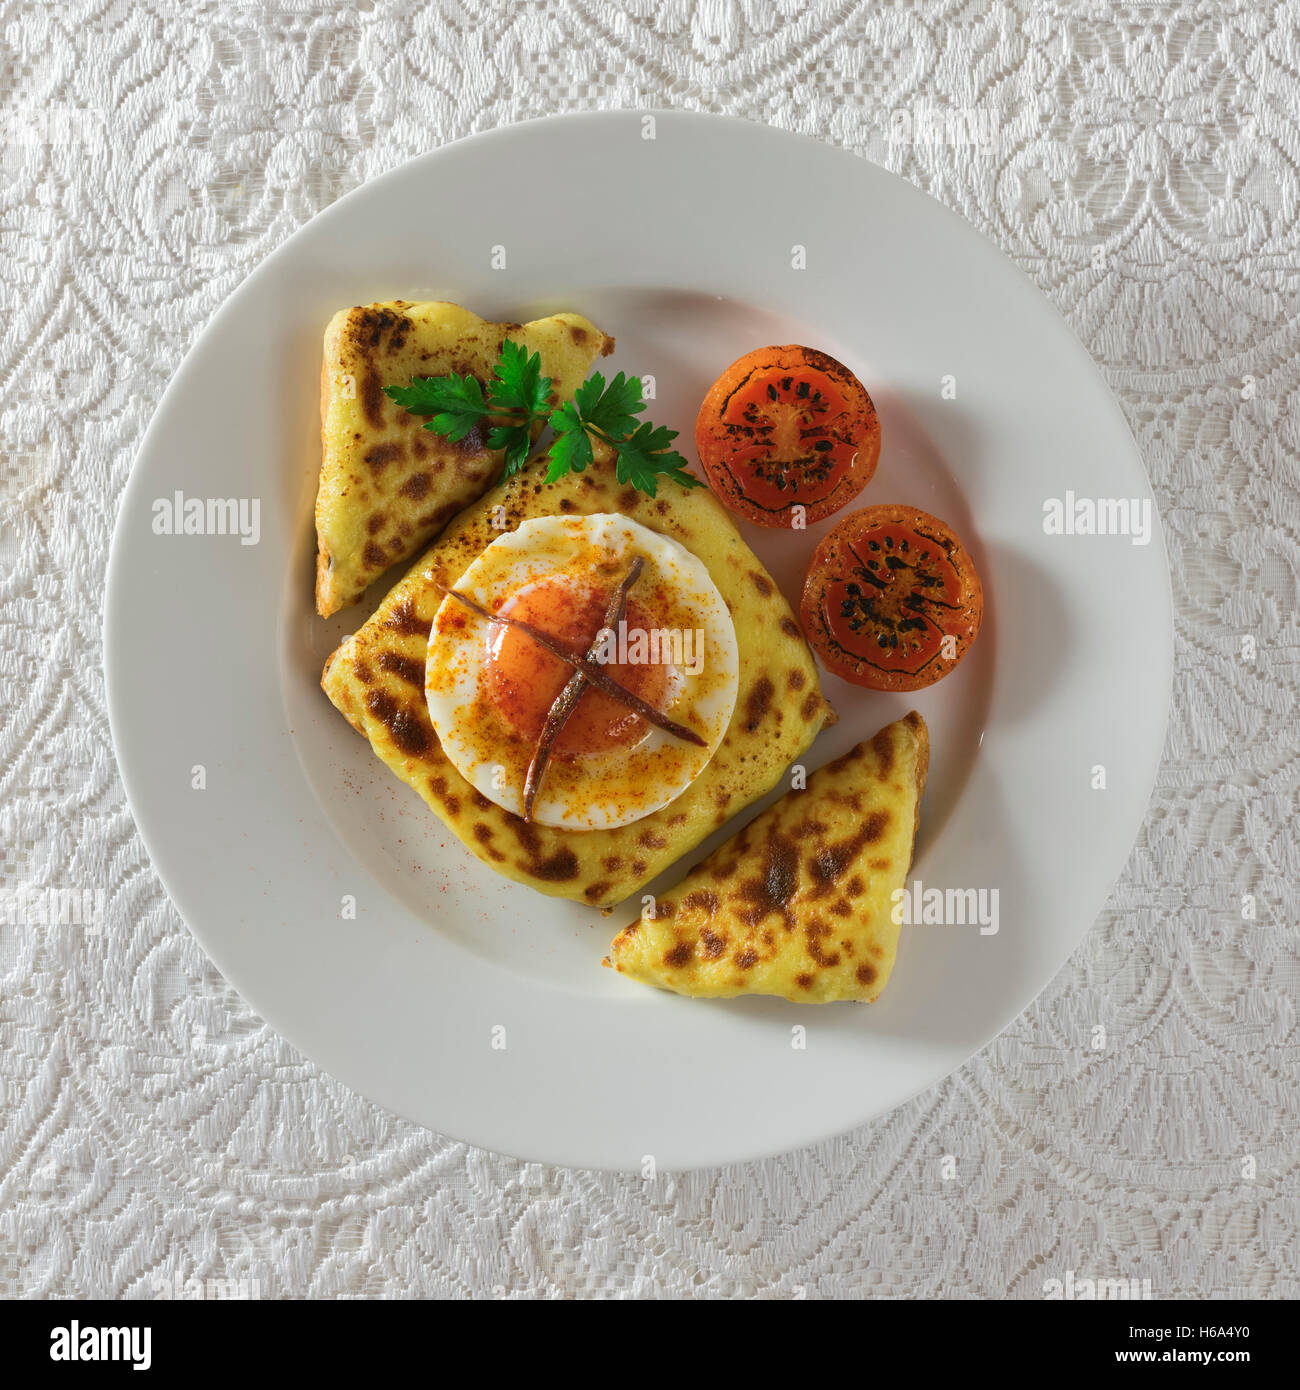 Buck rarebit. Grilled cheese topping on toast with a poached egg. Stock Photo